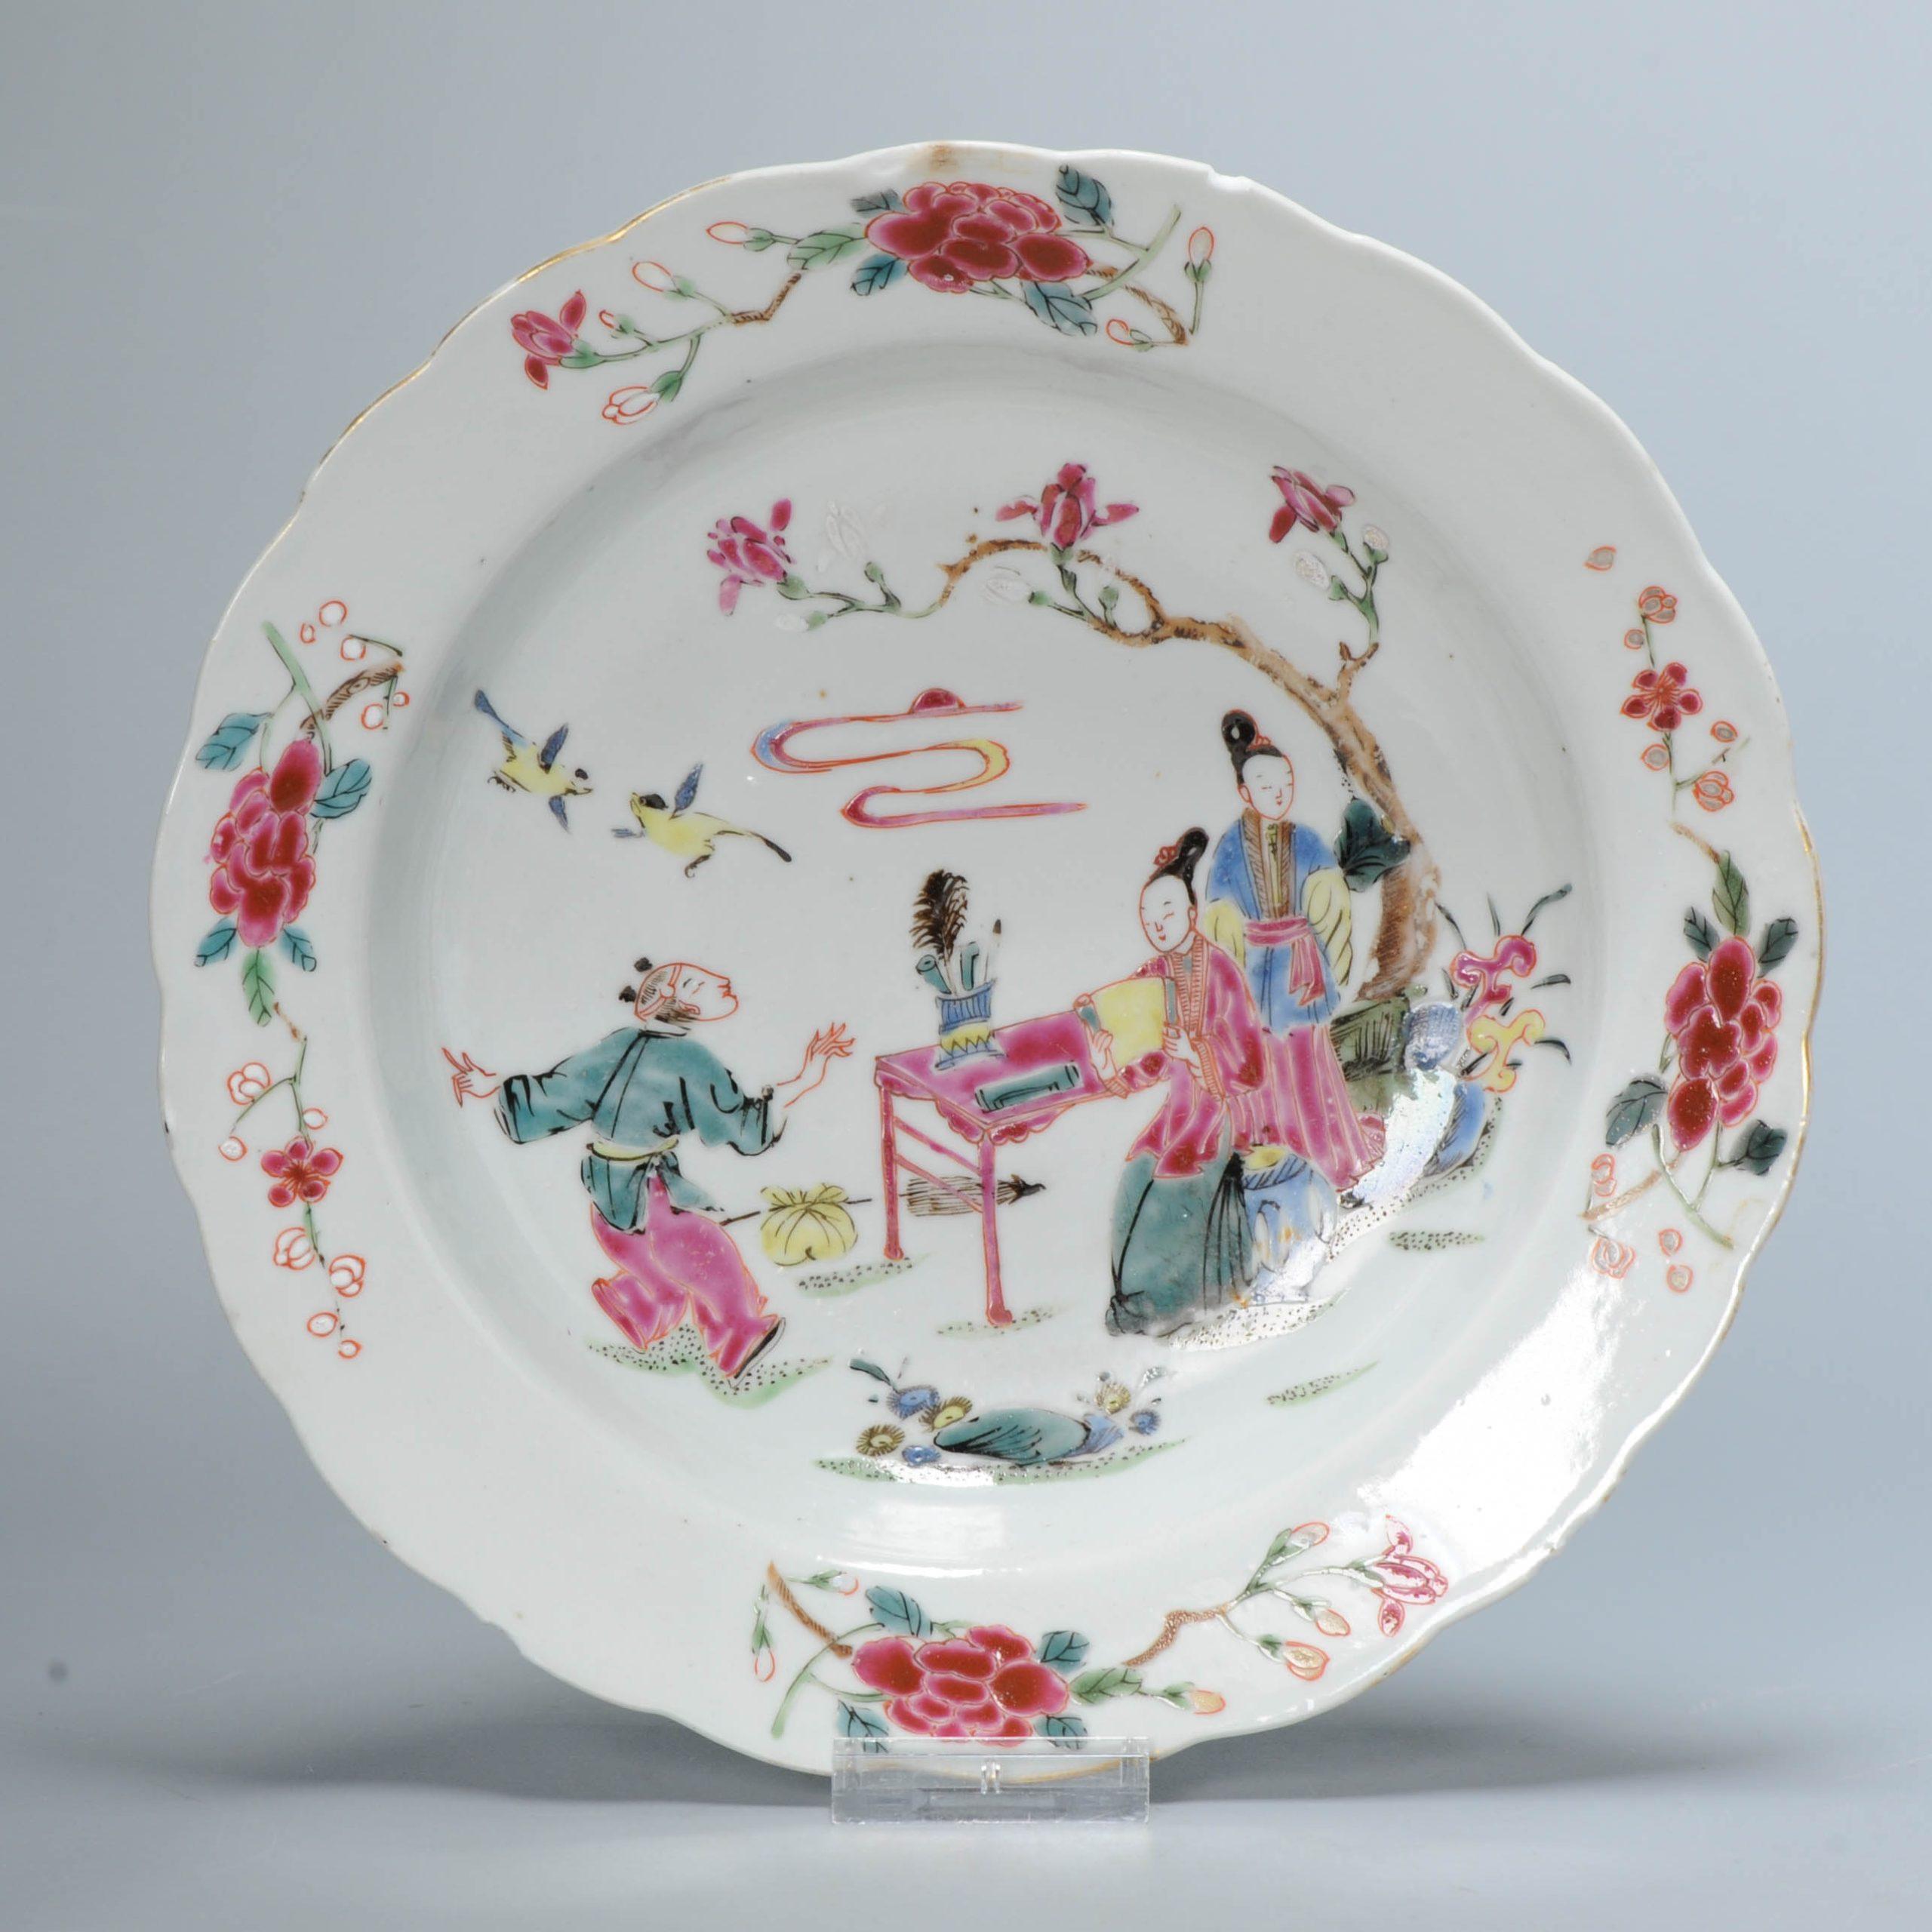 Sharing with you this lovely deep dish from the 18th century, Yongzheng or early Qianlong period. Very rare decoration.

The scene seems to be a nice variation on the beautiful ladies in the garden setting. It depicts the luxurious lifestyle of